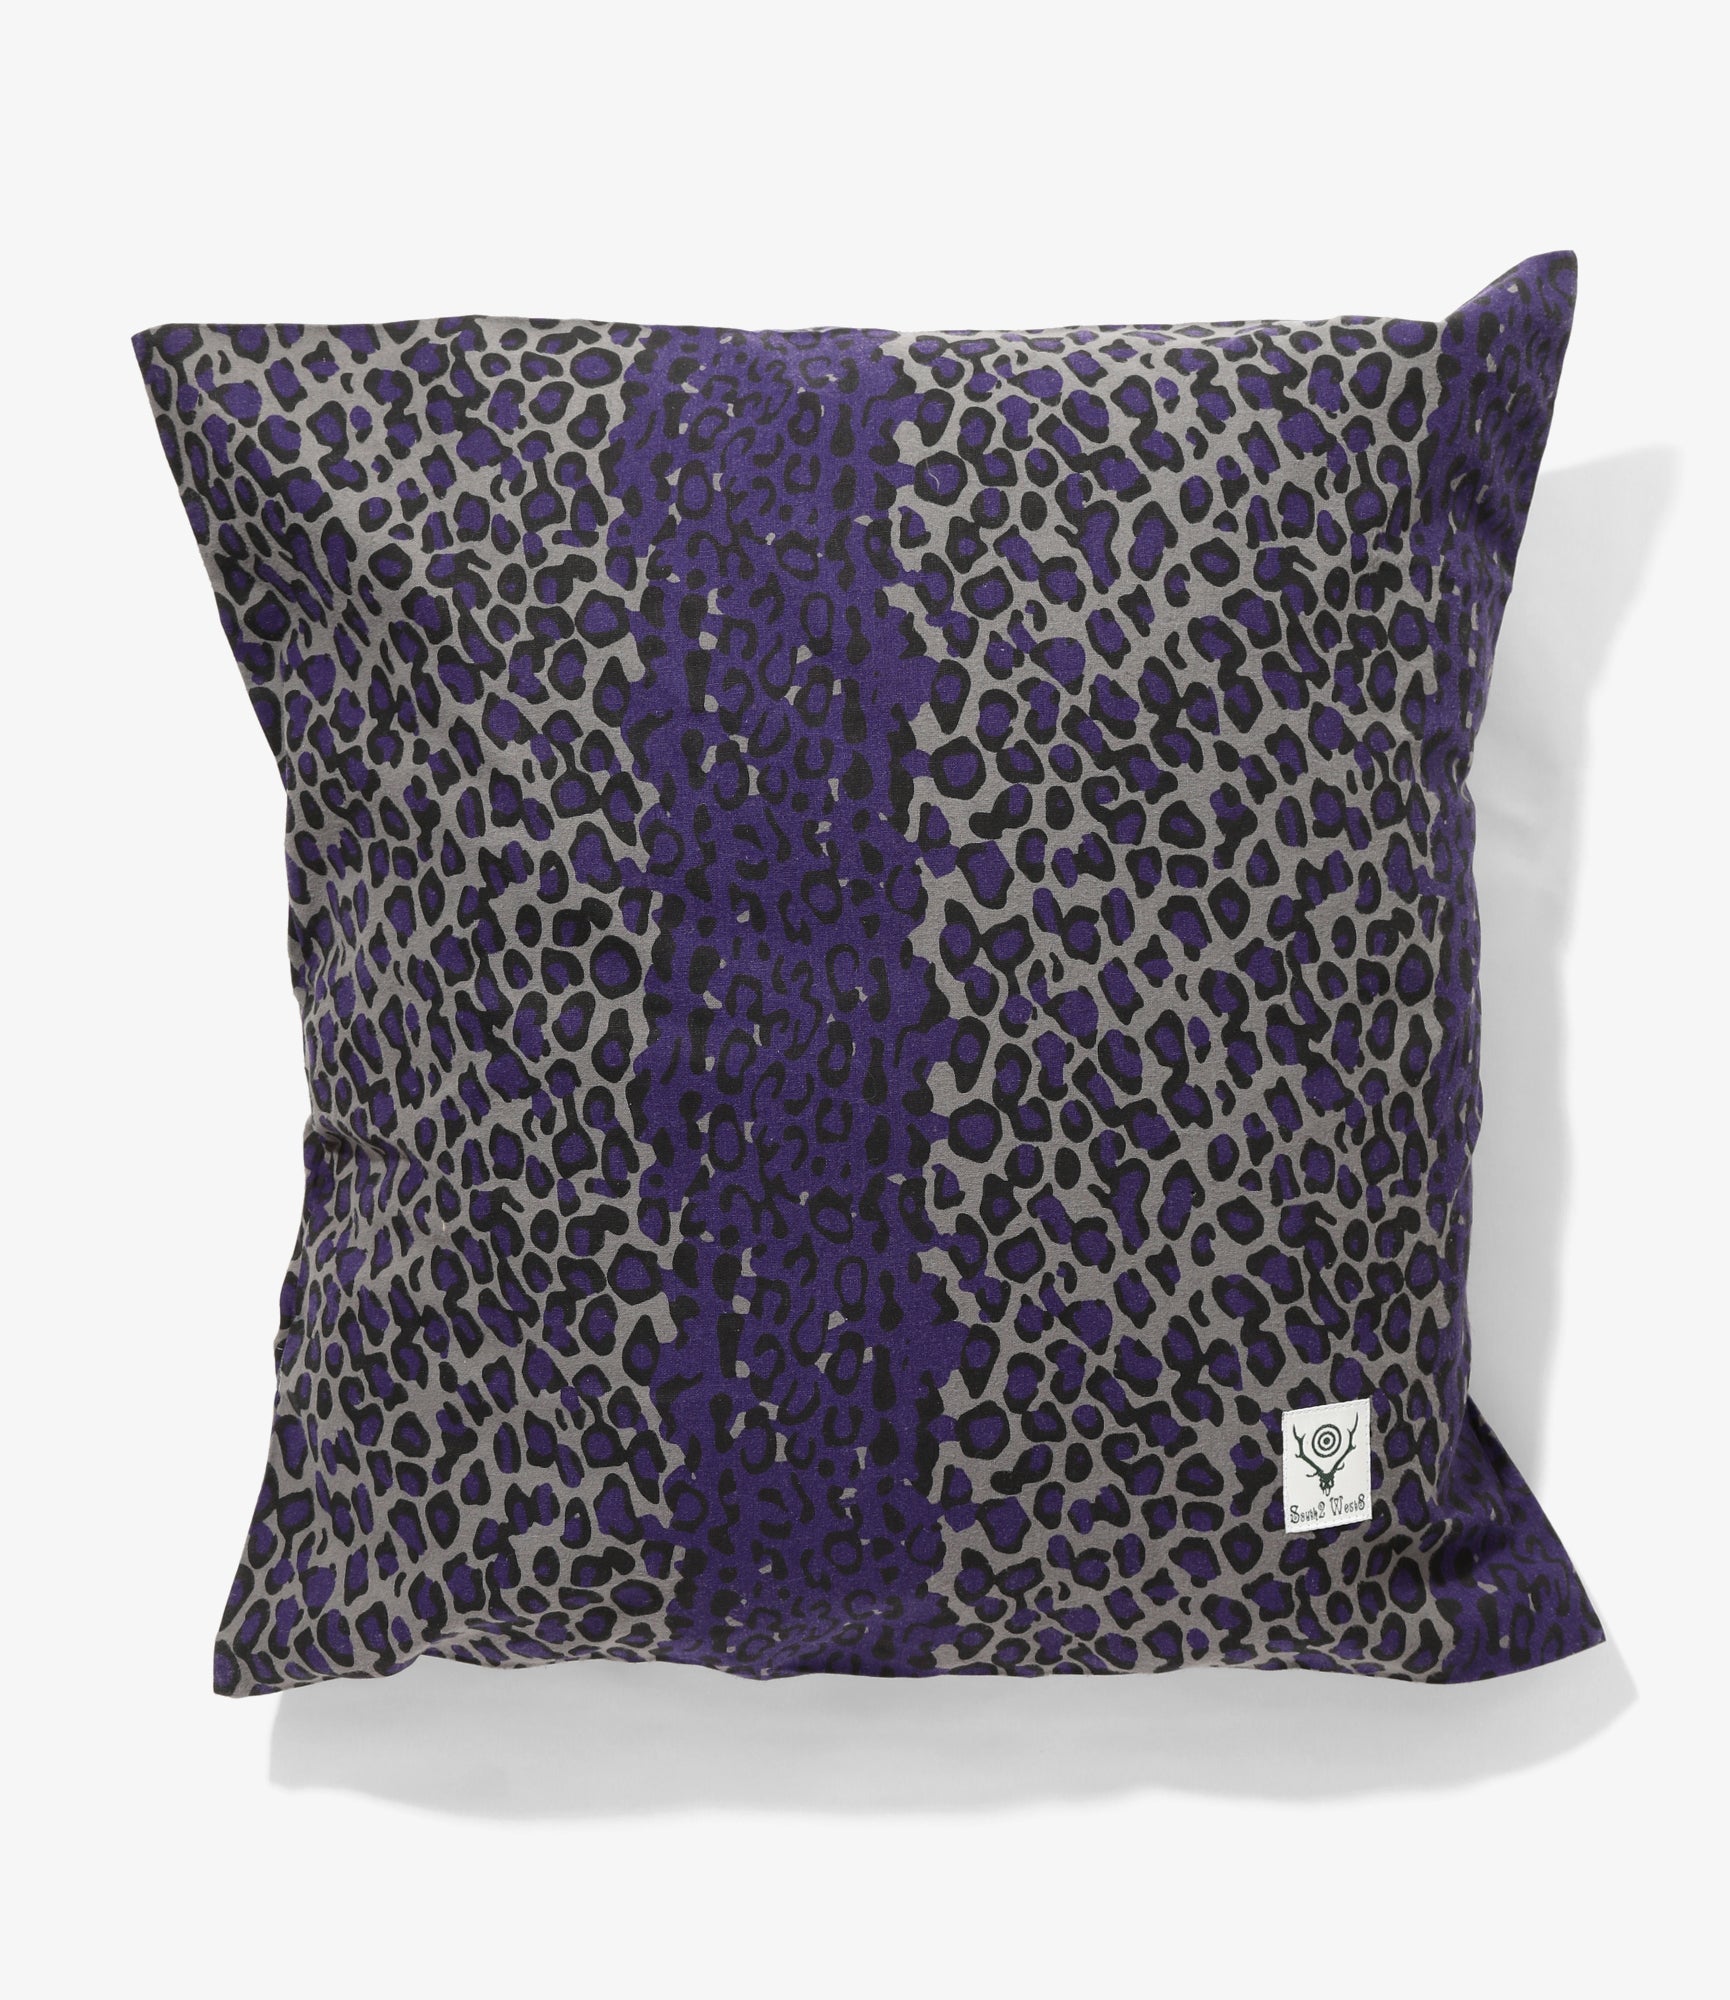 South2 West8 Cushion Cover - Flannel Cloth / Printed - Leopard